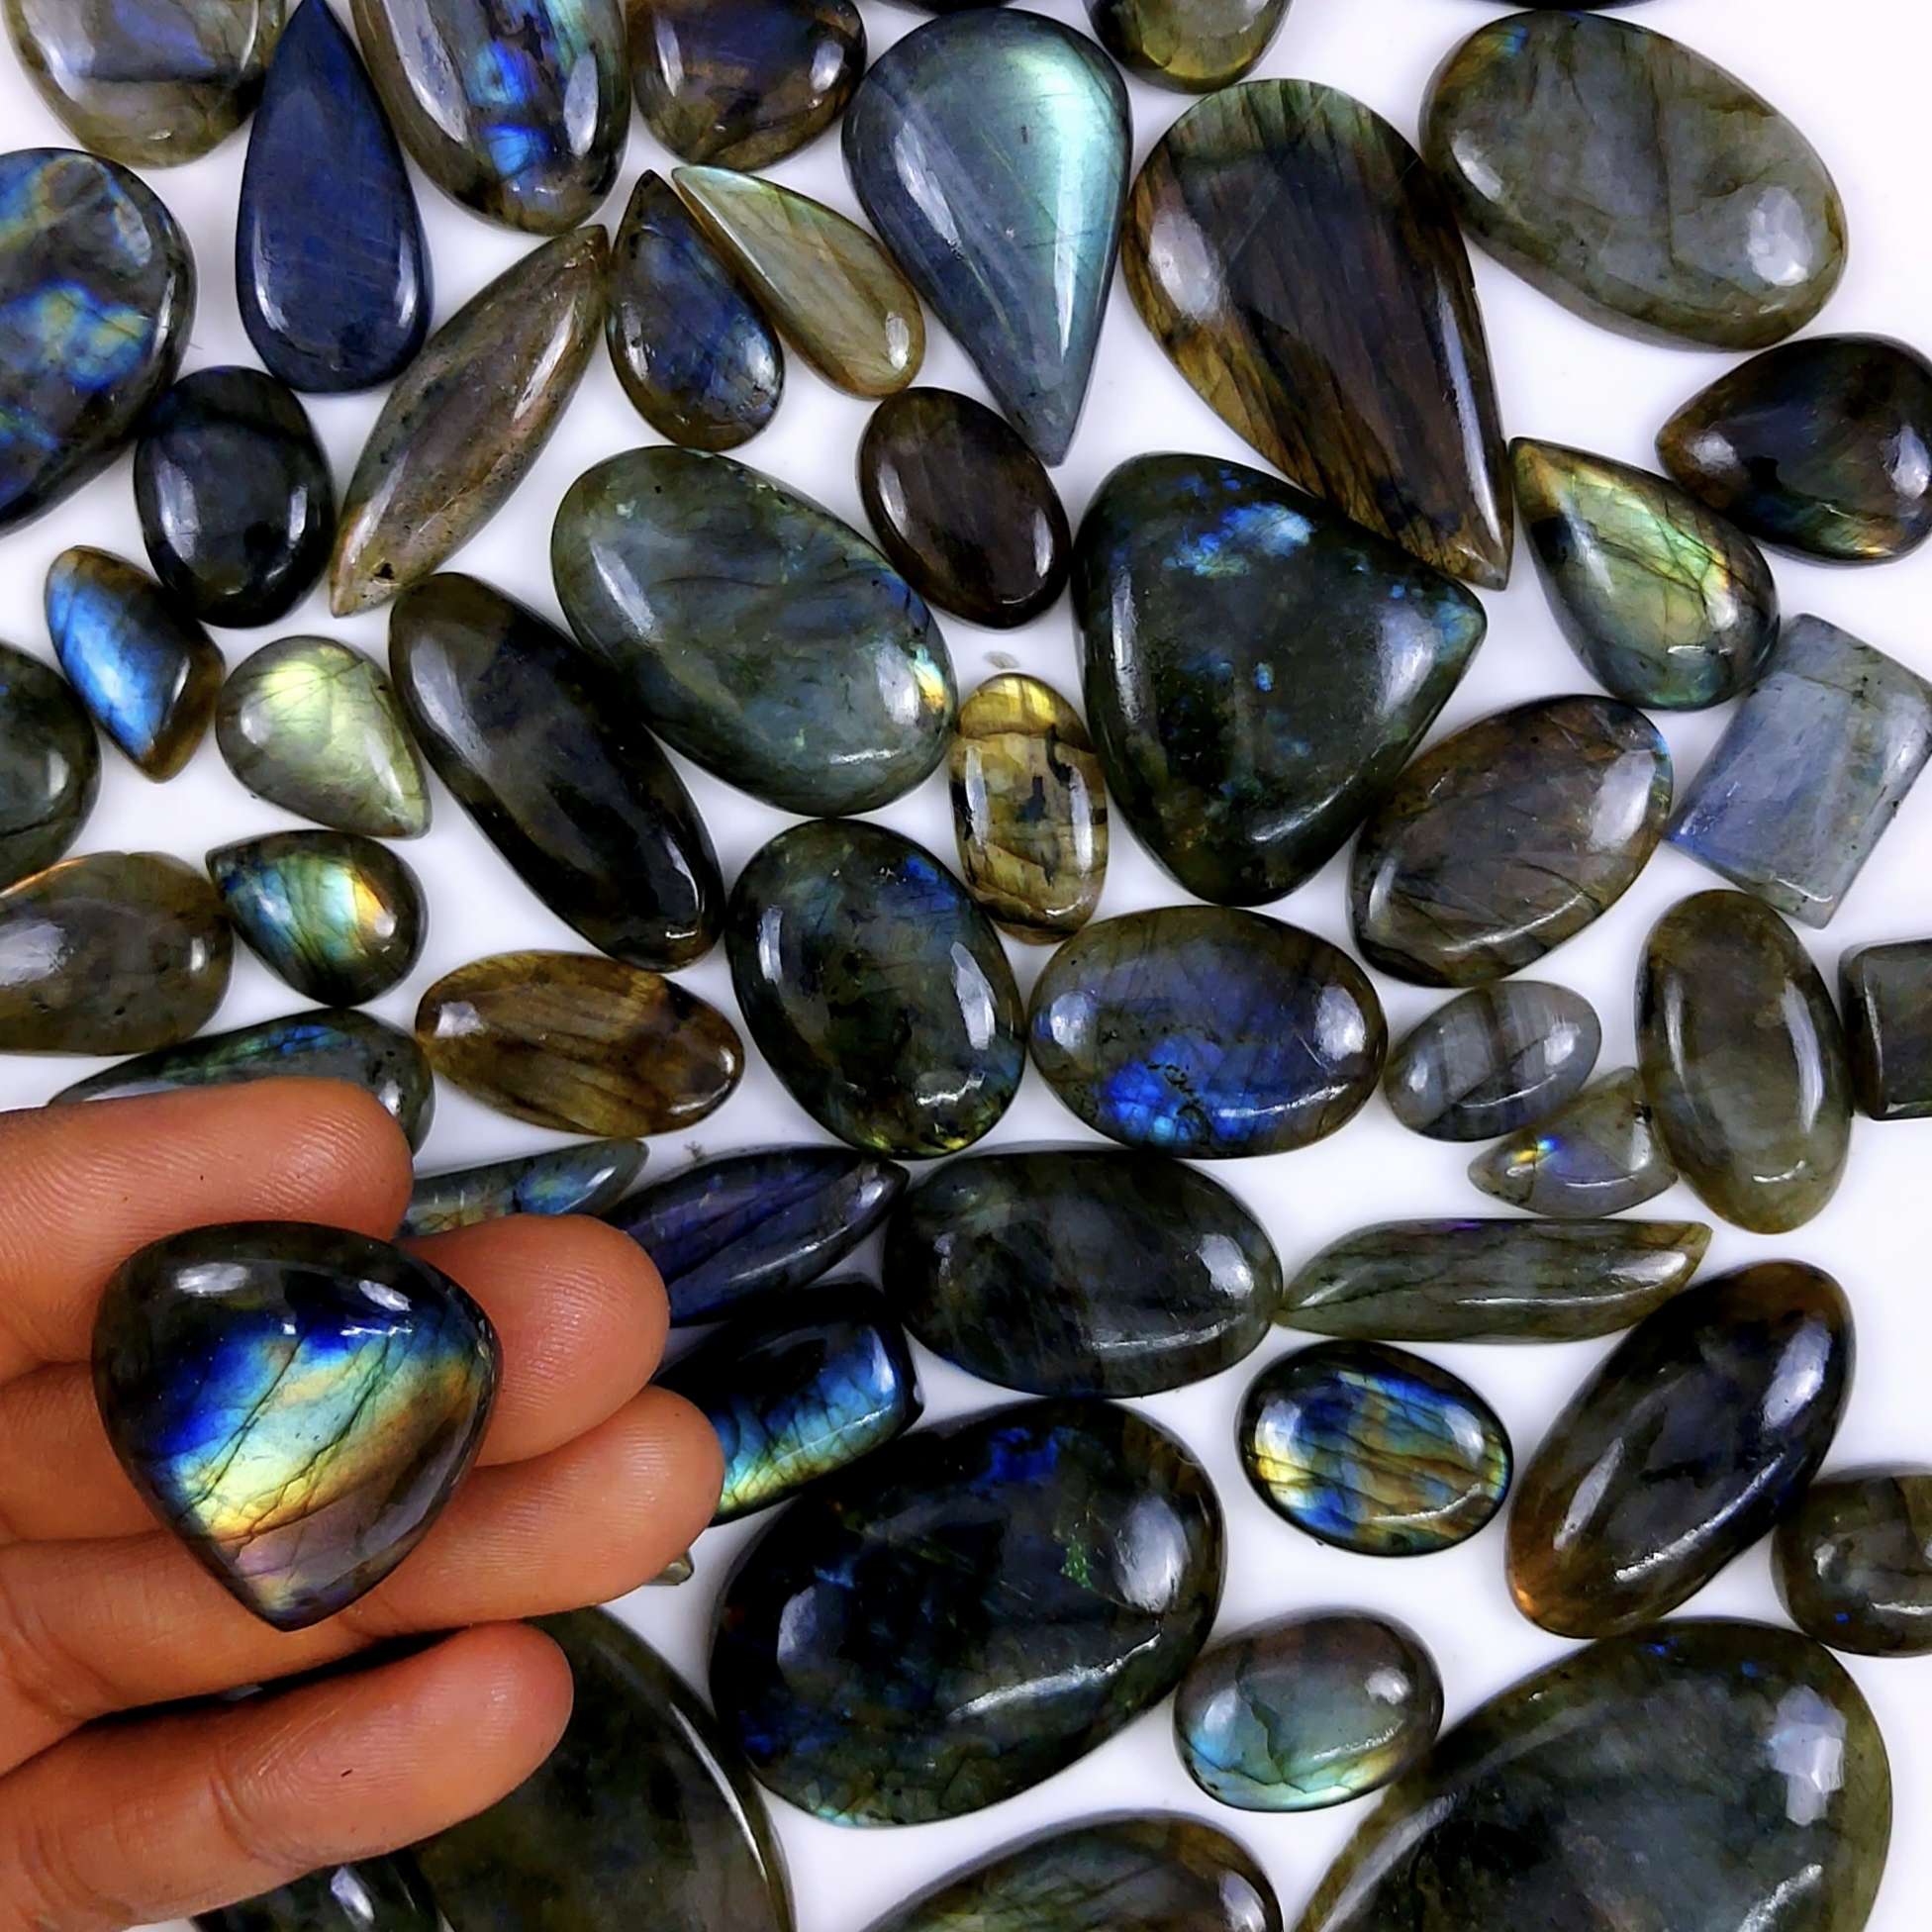 64pc 1881Cts Labradorite Cabochon Multifire Healing Crystal For Jewelry Supplies, Labradorite Necklace Handmade Wire Wrapped Gemstone Pendant 58x30 18x16mm#6353